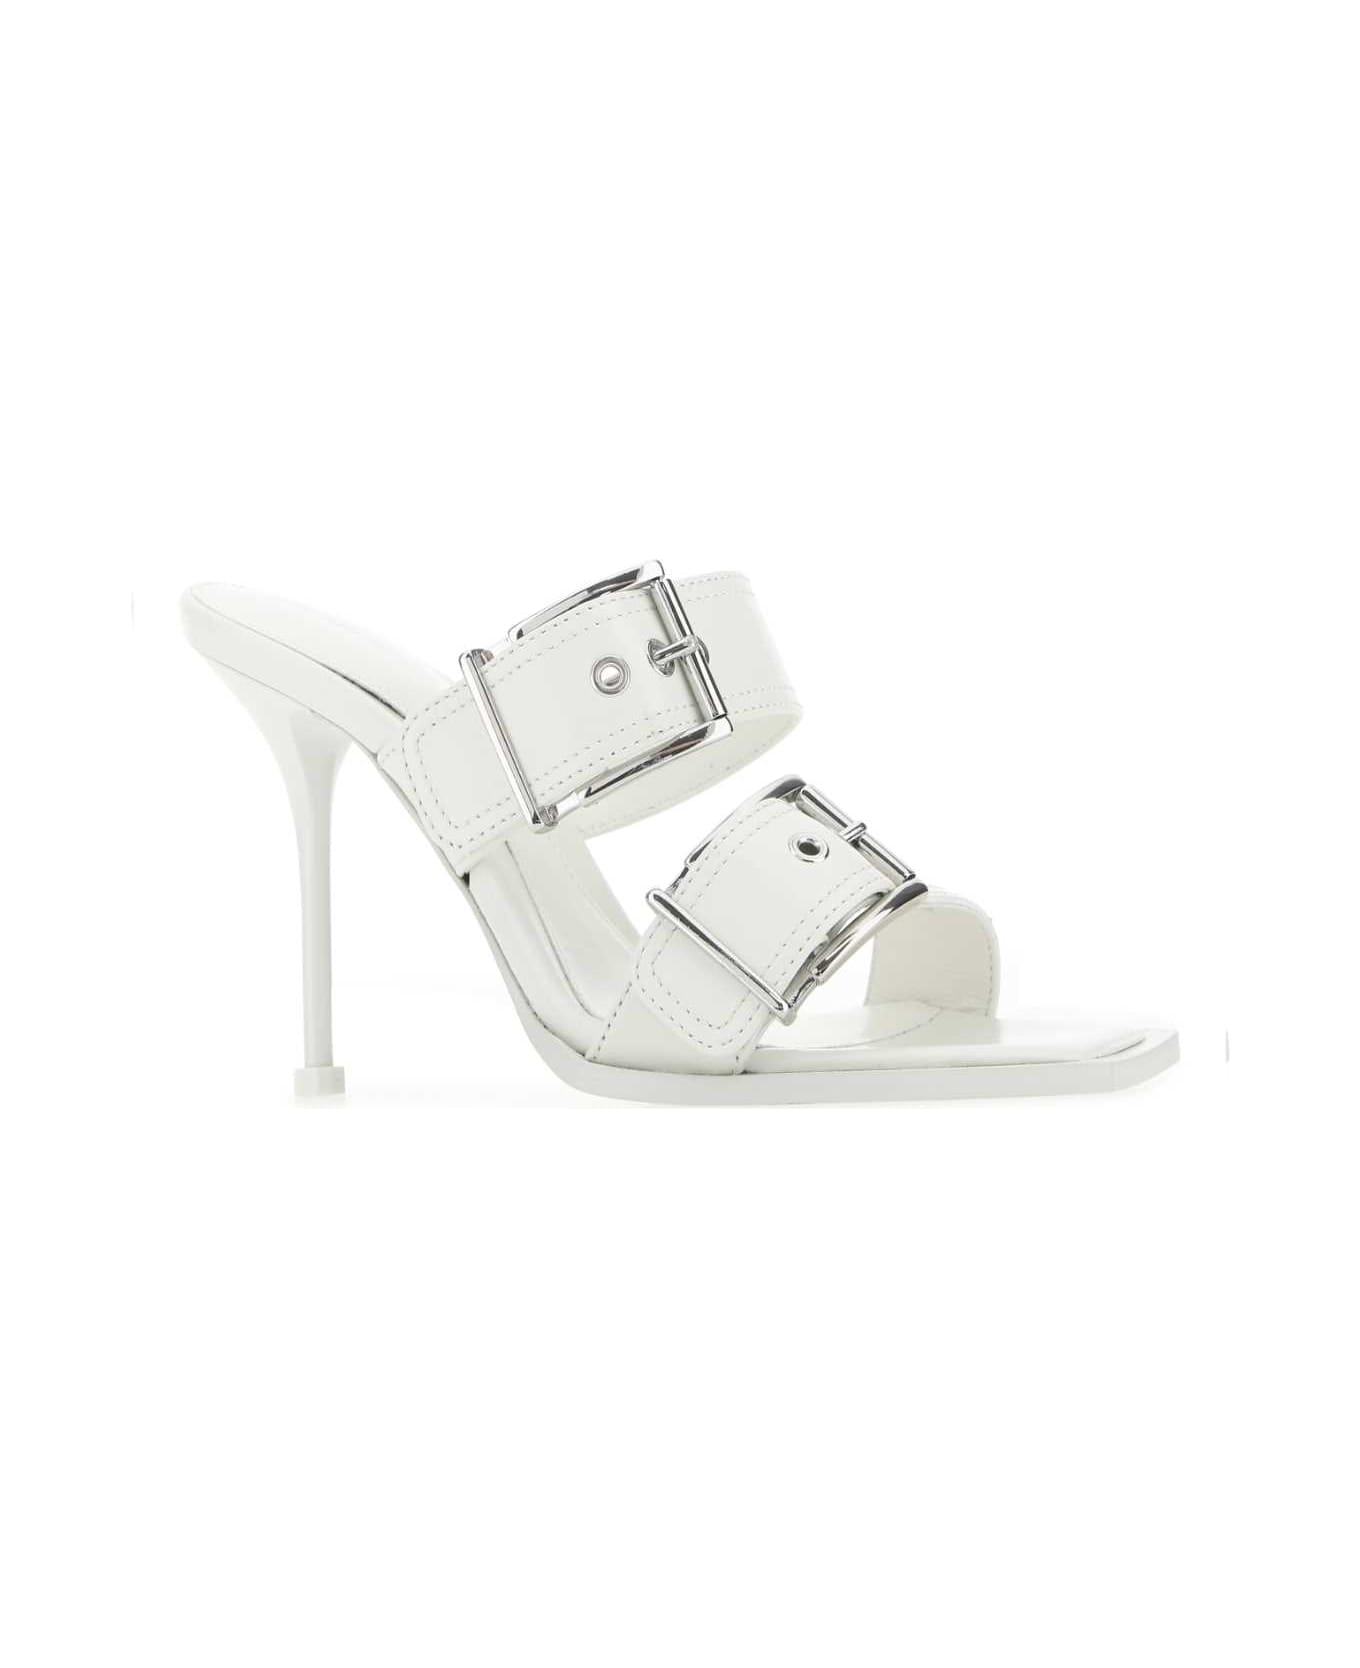 Alexander McQueen White Leather Mules - 9359